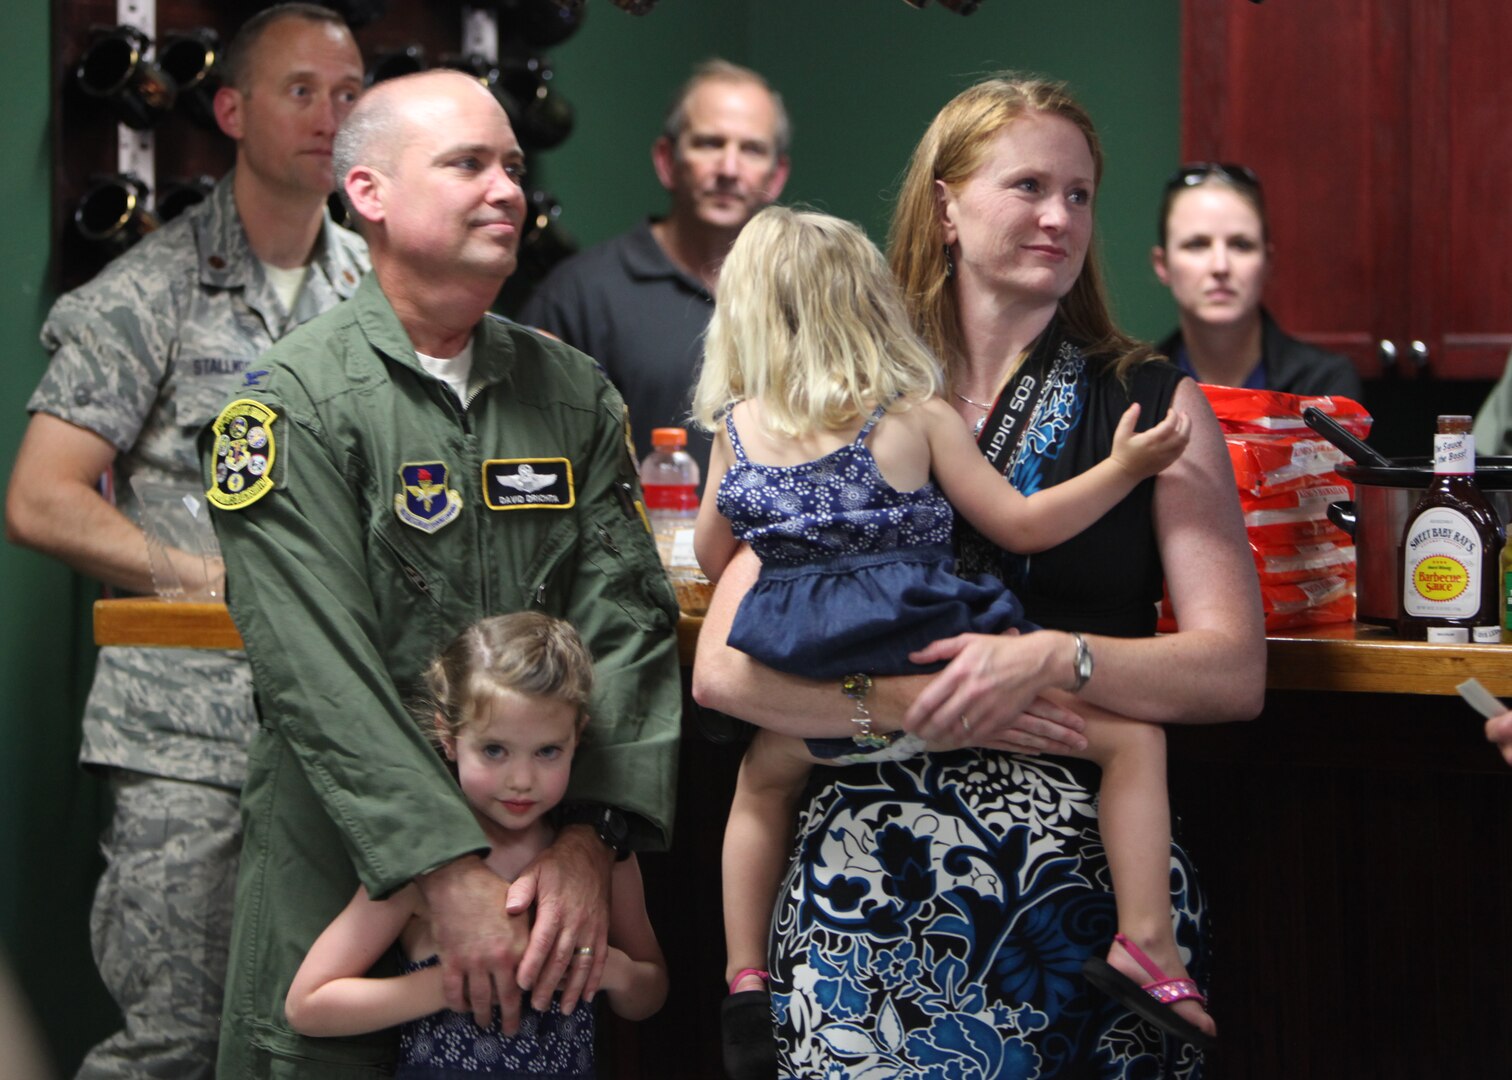 Col. David Drichta, 12th Operations Group deputy commander, his wife Shannon, and daughters, Natalie and Allison, are recognized in the 435th Fighter Training Squadron after Drichta’s first flight back after his battle with cancer at Joint Base San Antonio-Randolph, Texas June 19, 2013.  Drichta was diagnosed with Stage IV cancer in February 2012 and, after more than a year in recovery, was medically cleared to return to flight status.  The flight marked his return to flight status as well as his 3,000th flight hour in Air Force aircraft. (Courtesy photo by Stacy Nyikos)